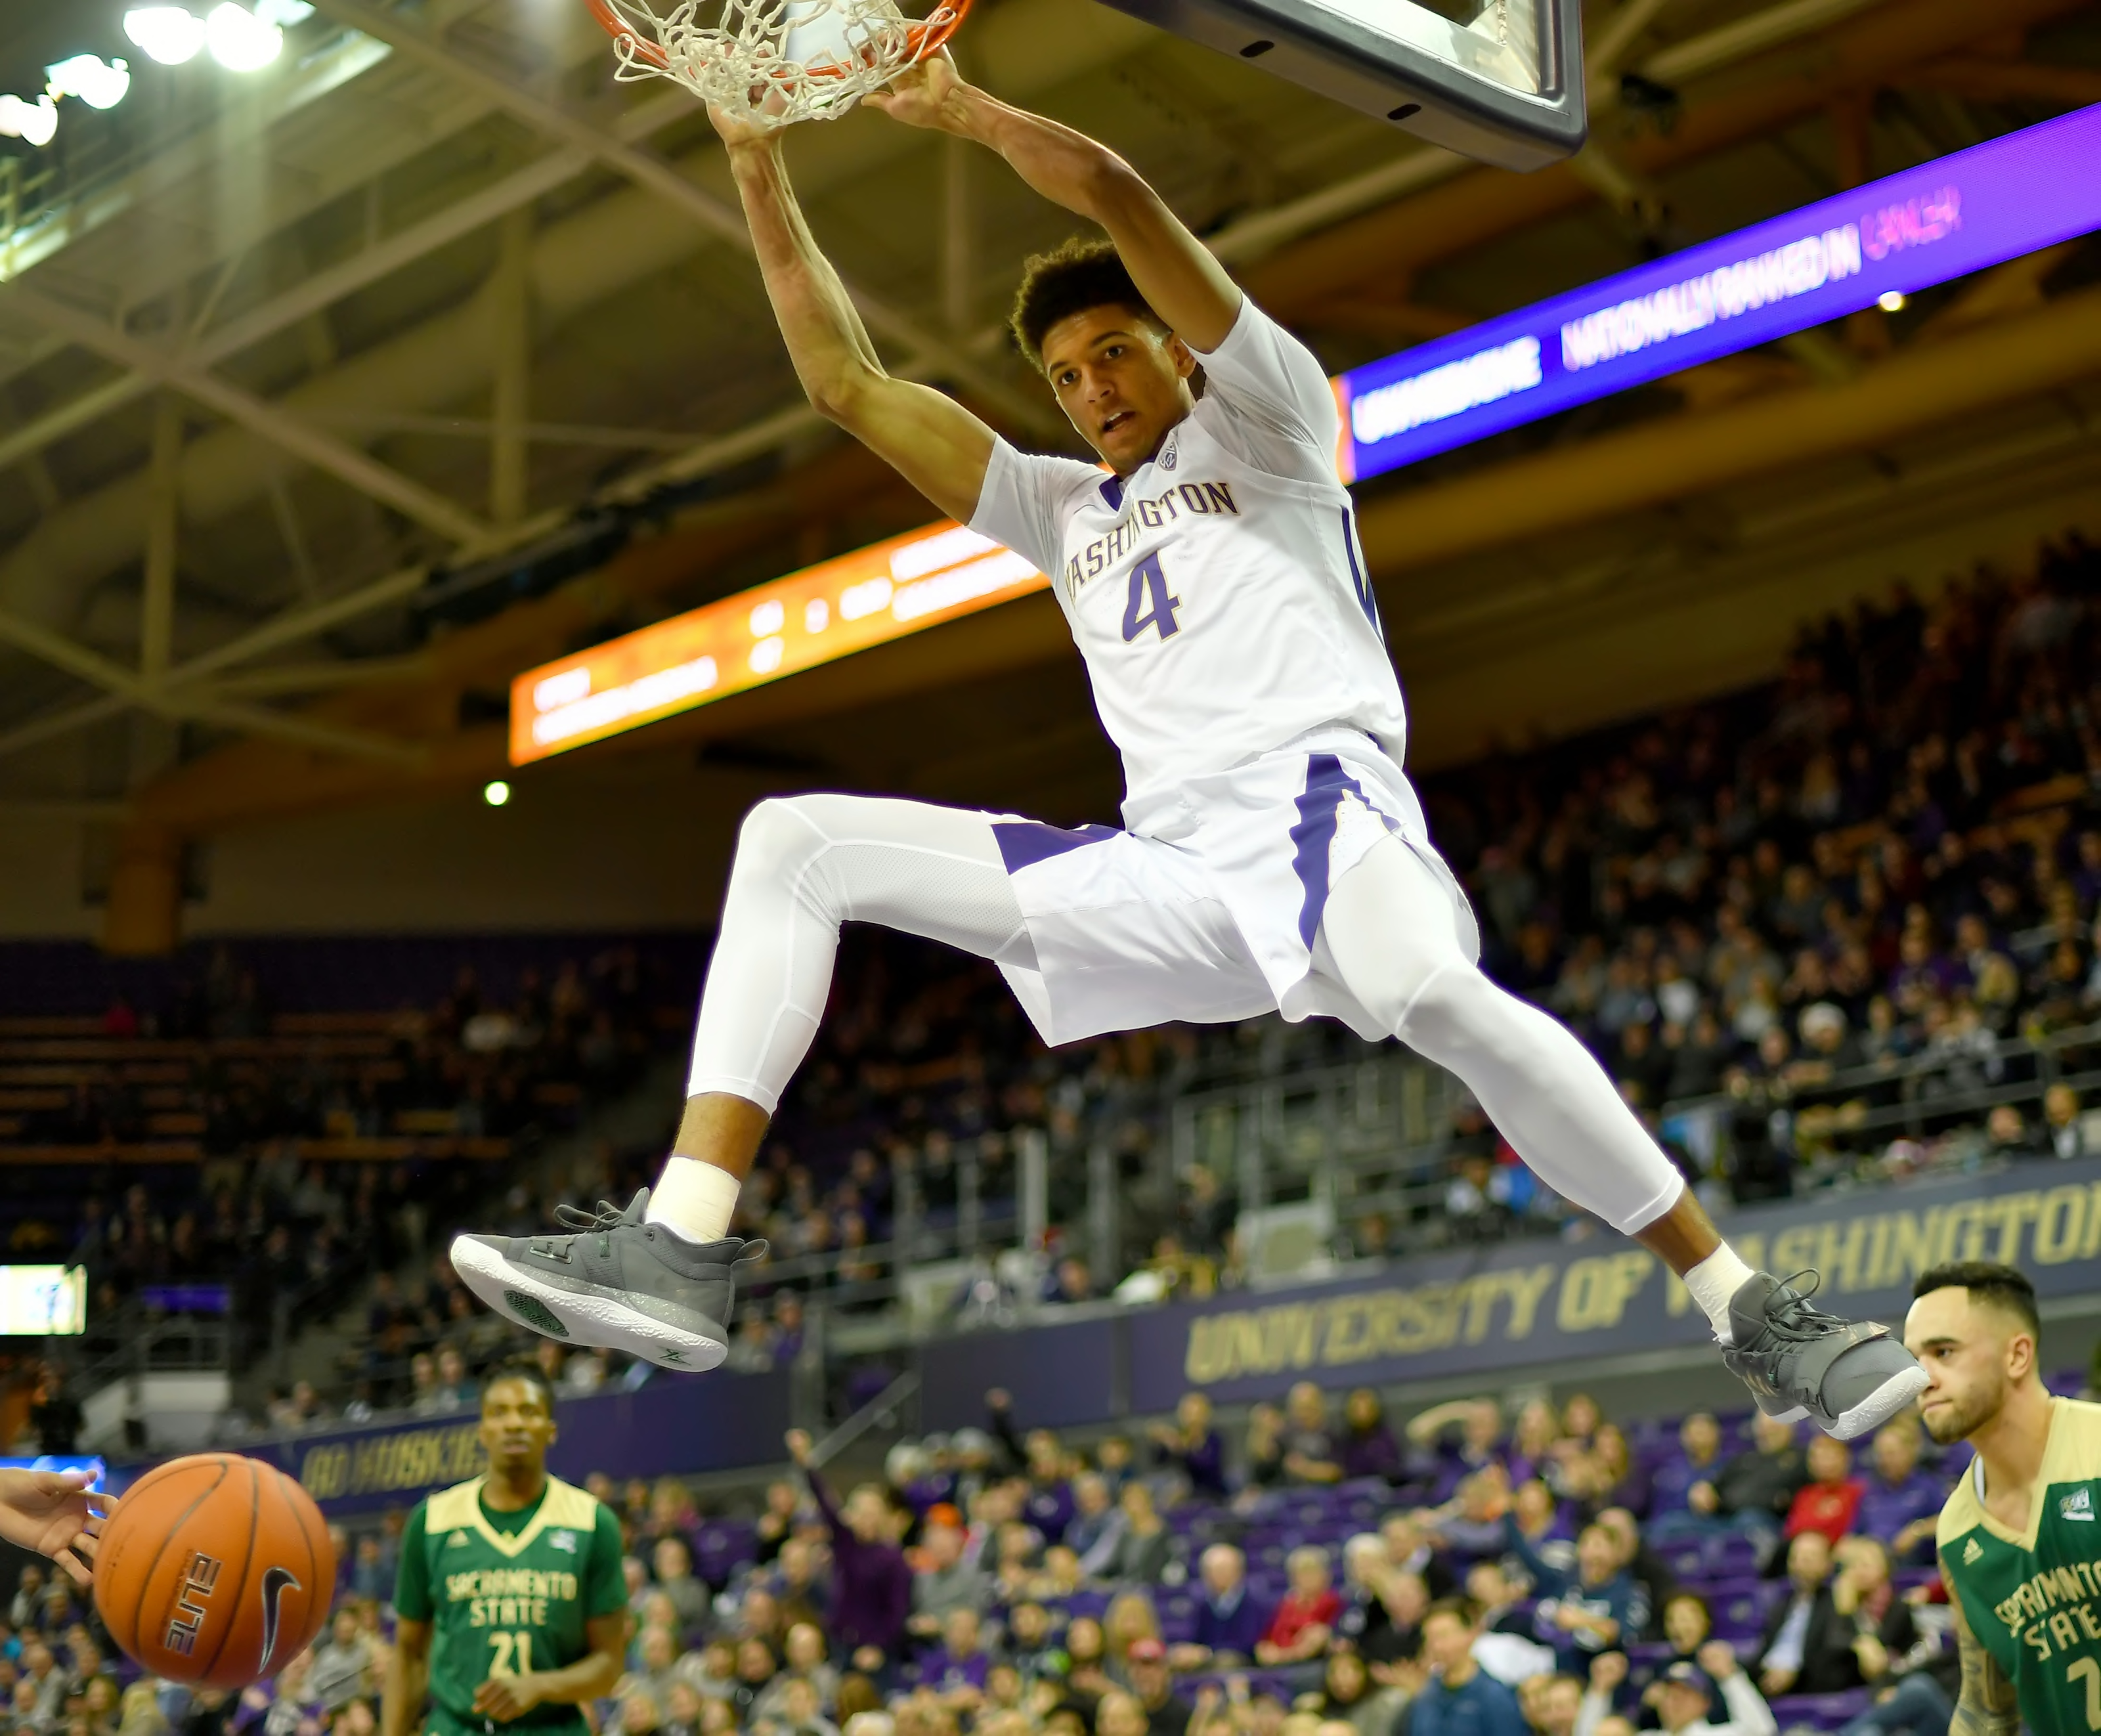 Dunk by Matisse Thybulle